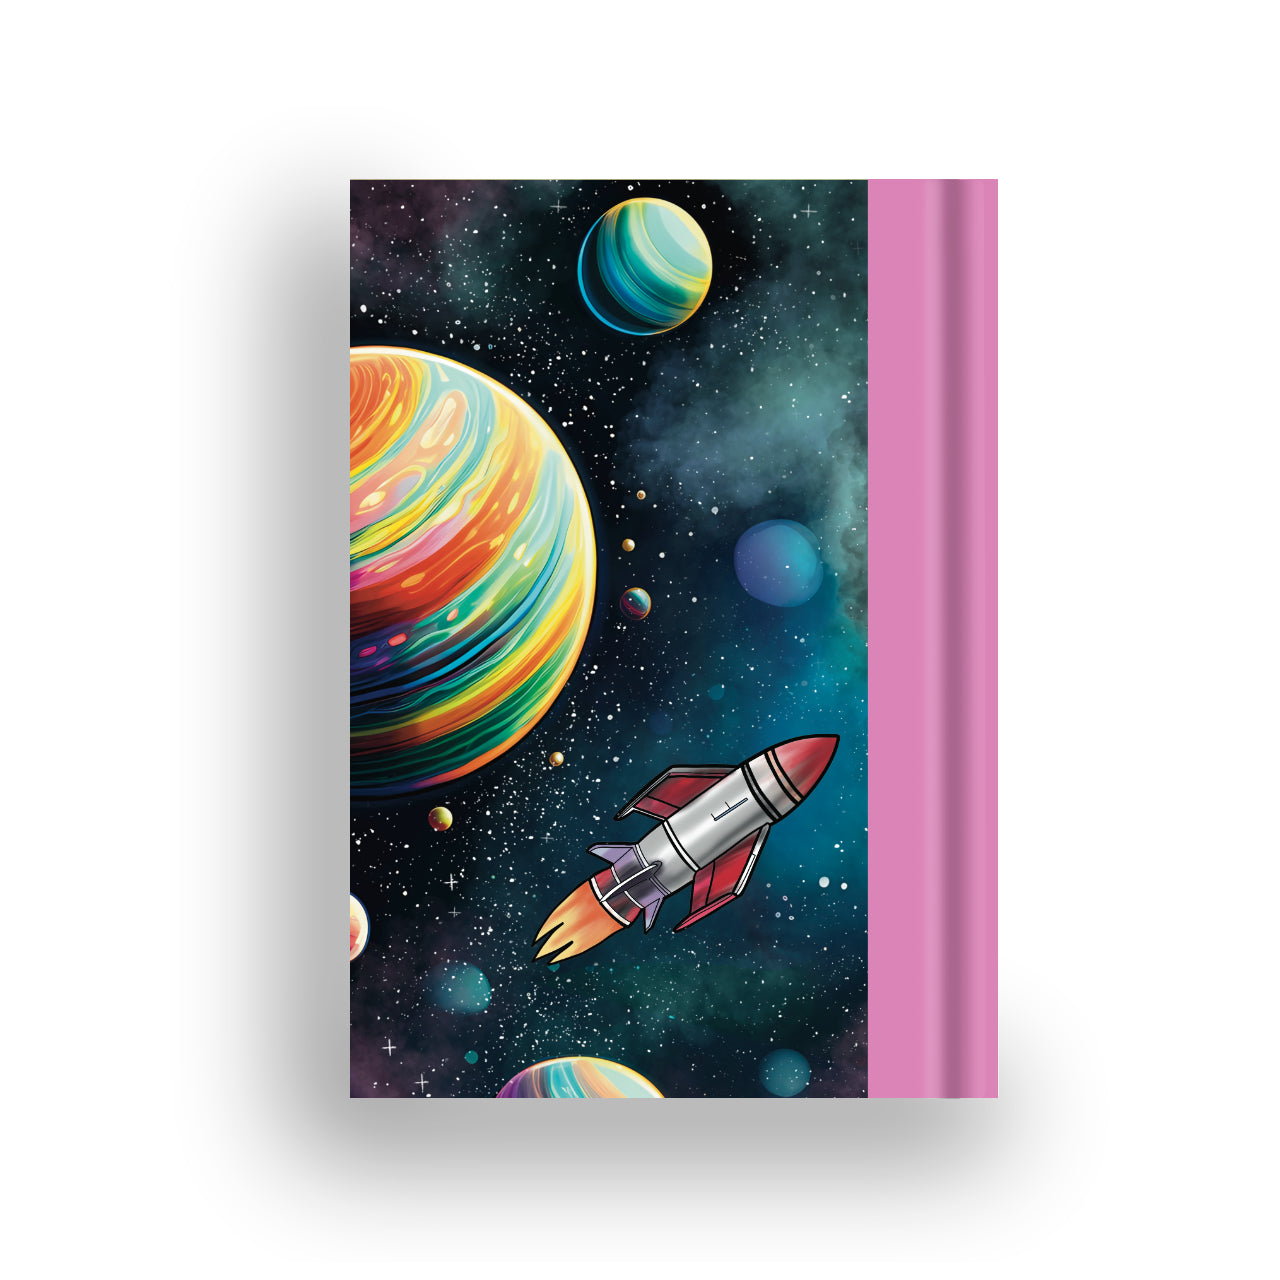 Astro pugs back cover with a rocket and planet in a nebula